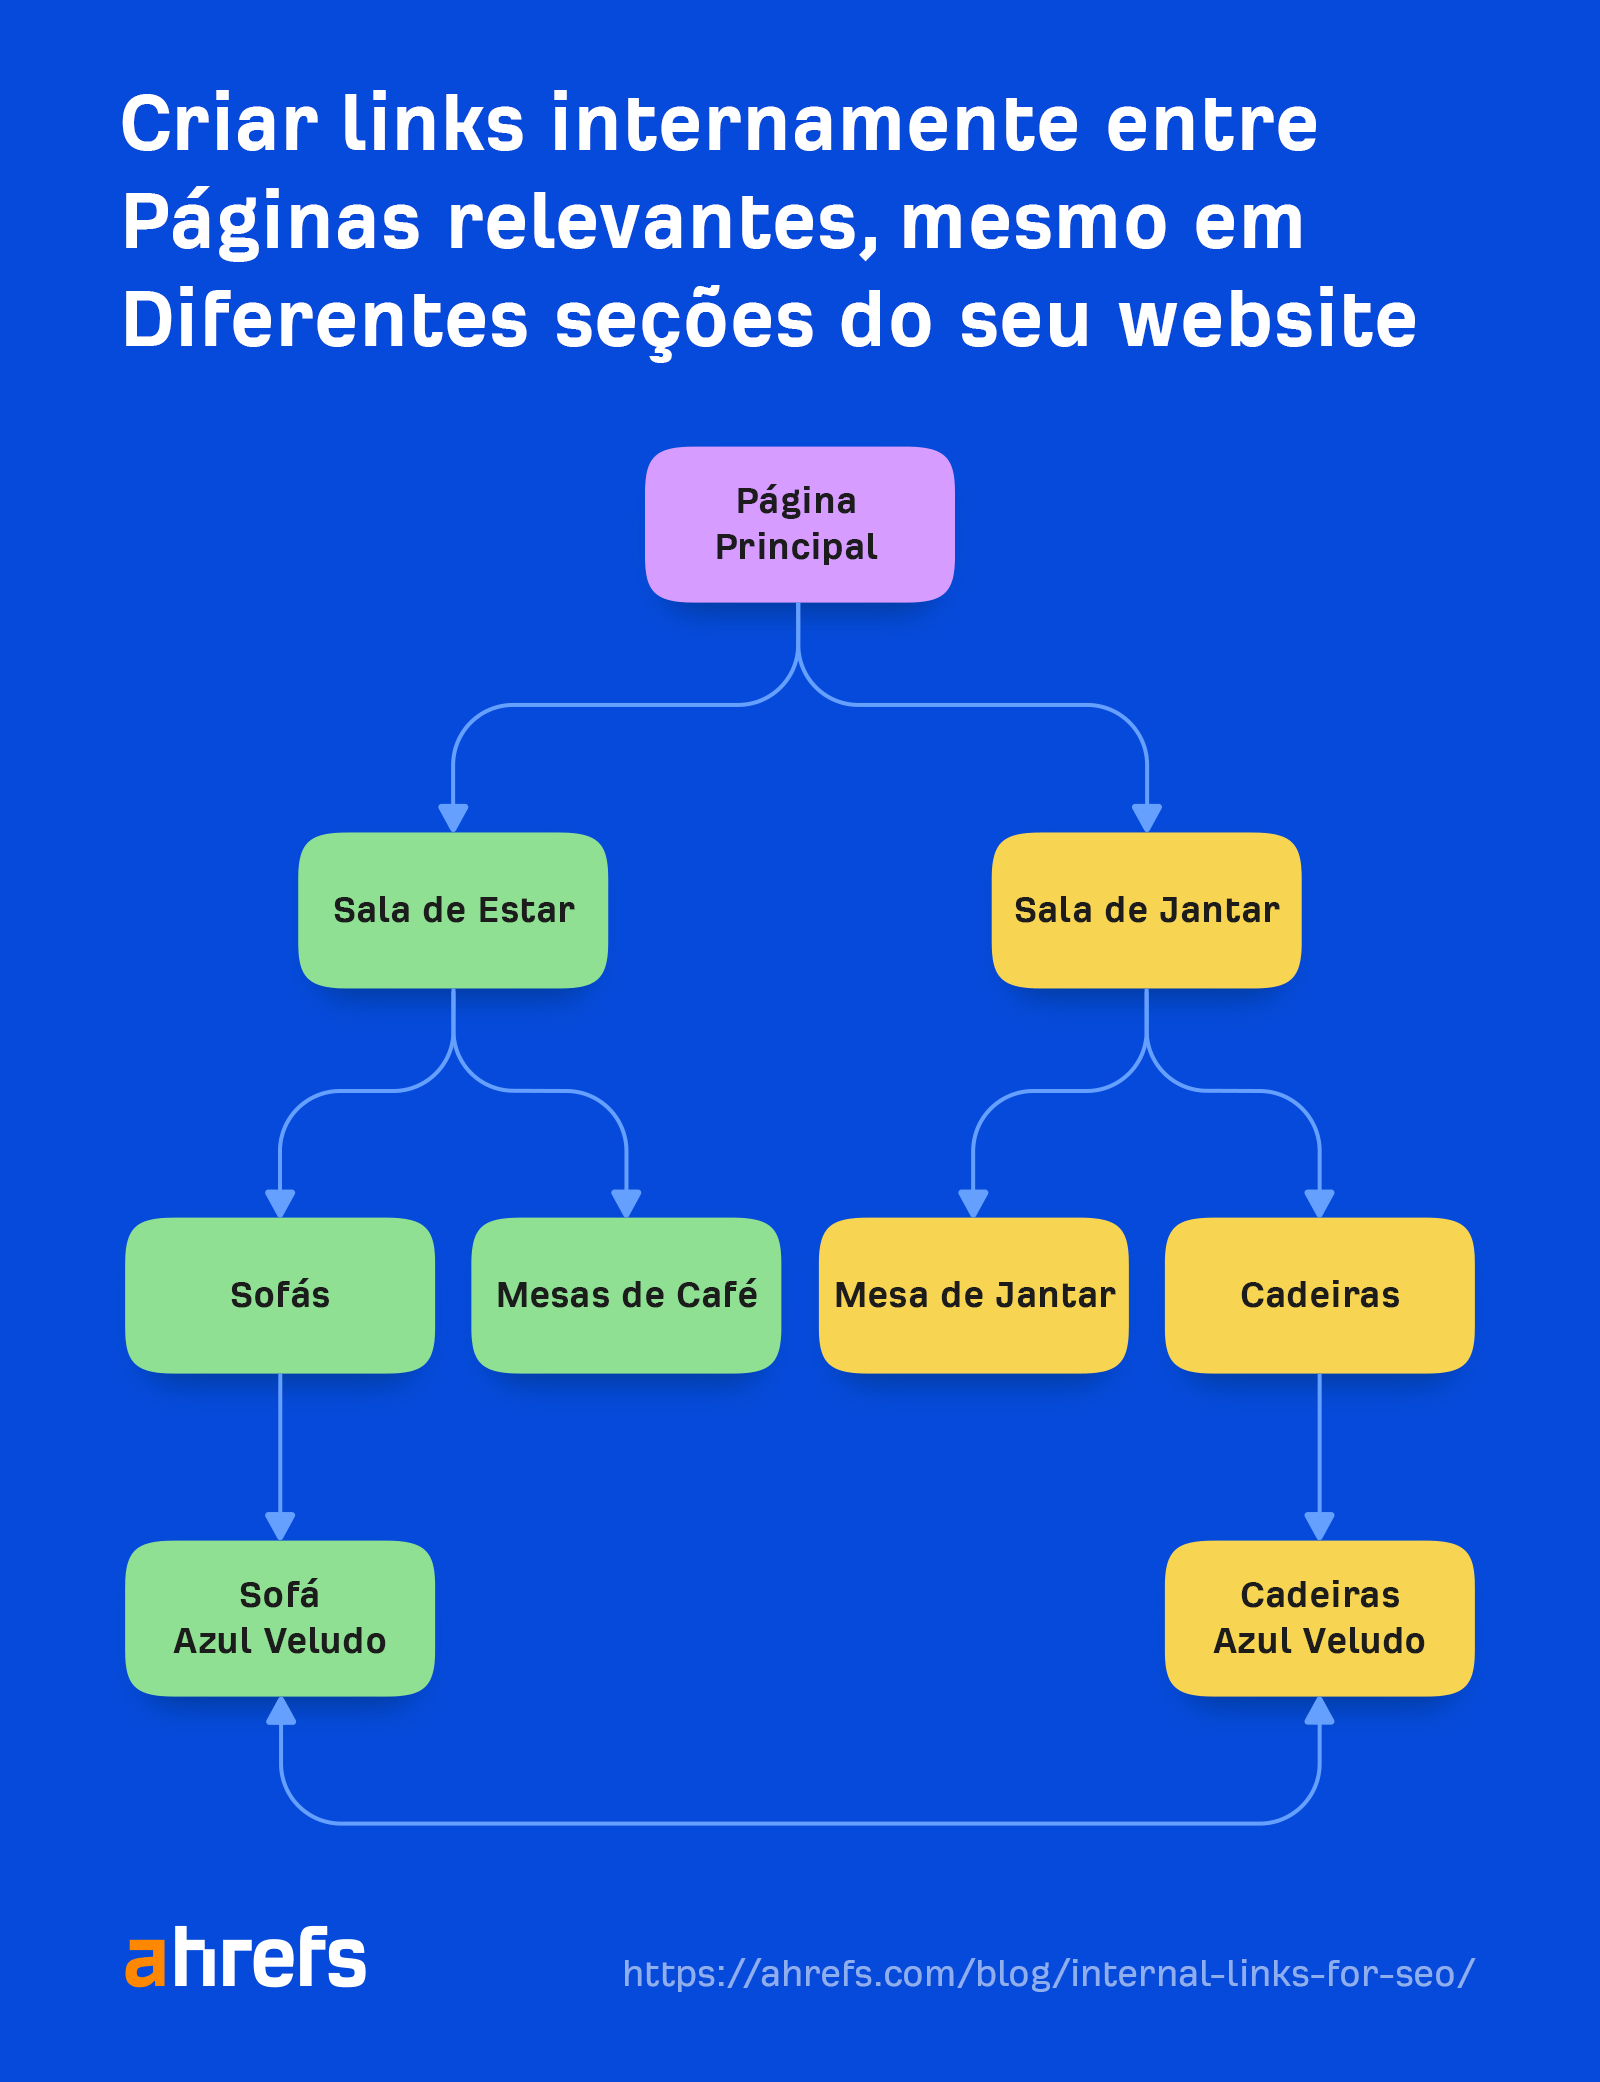 Flowchart on internally linking between relevant pages in different sections of a site 